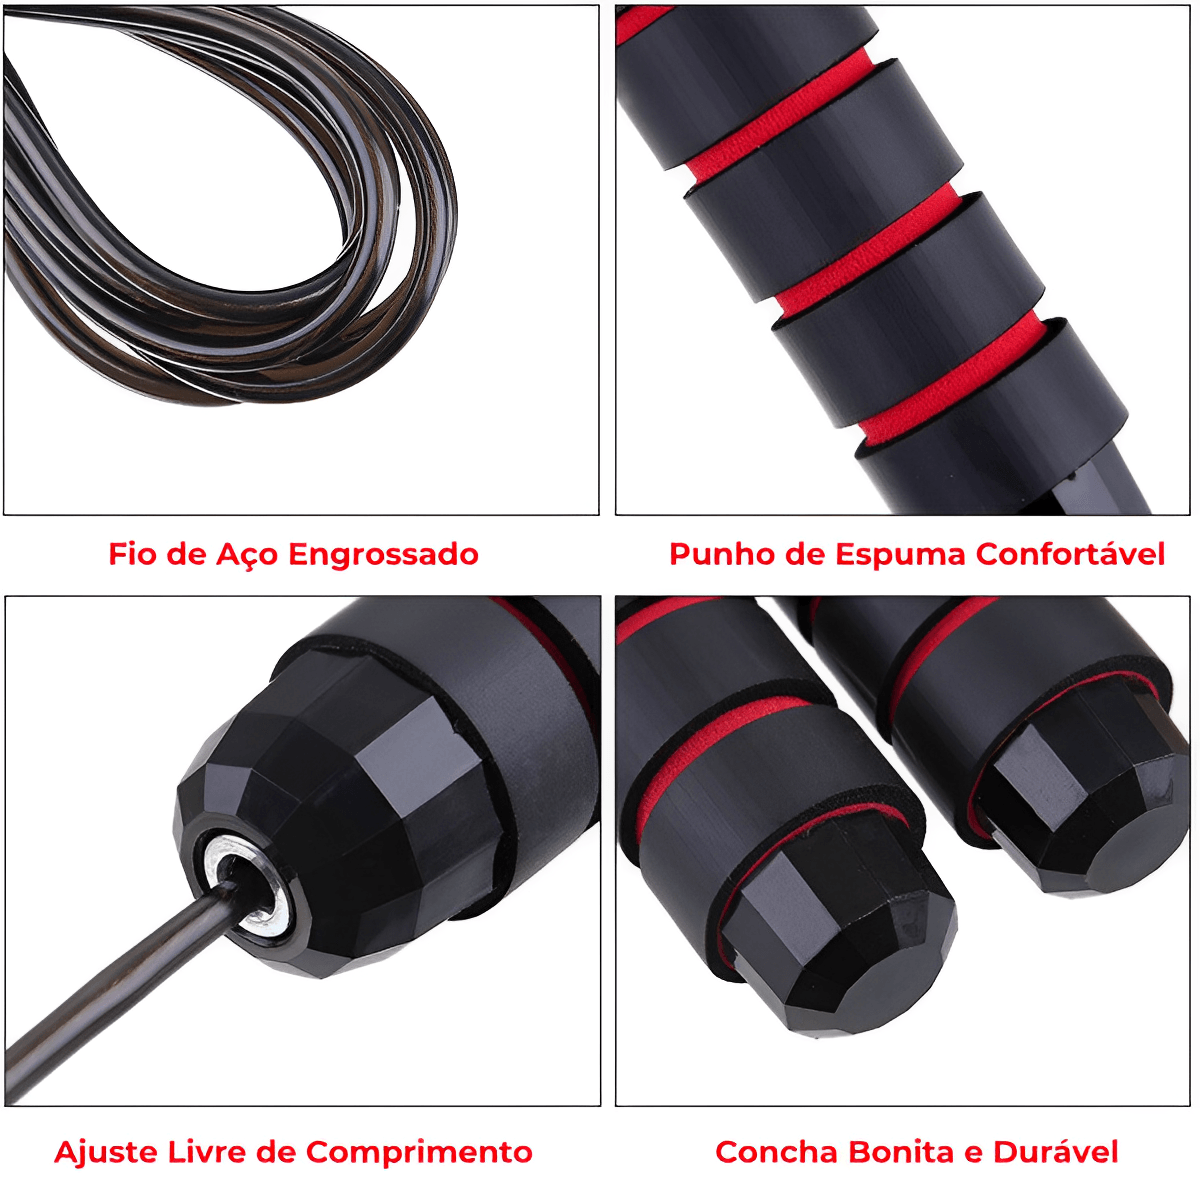 High-speed Steele Jump Rope with Bearings, Premium Quality